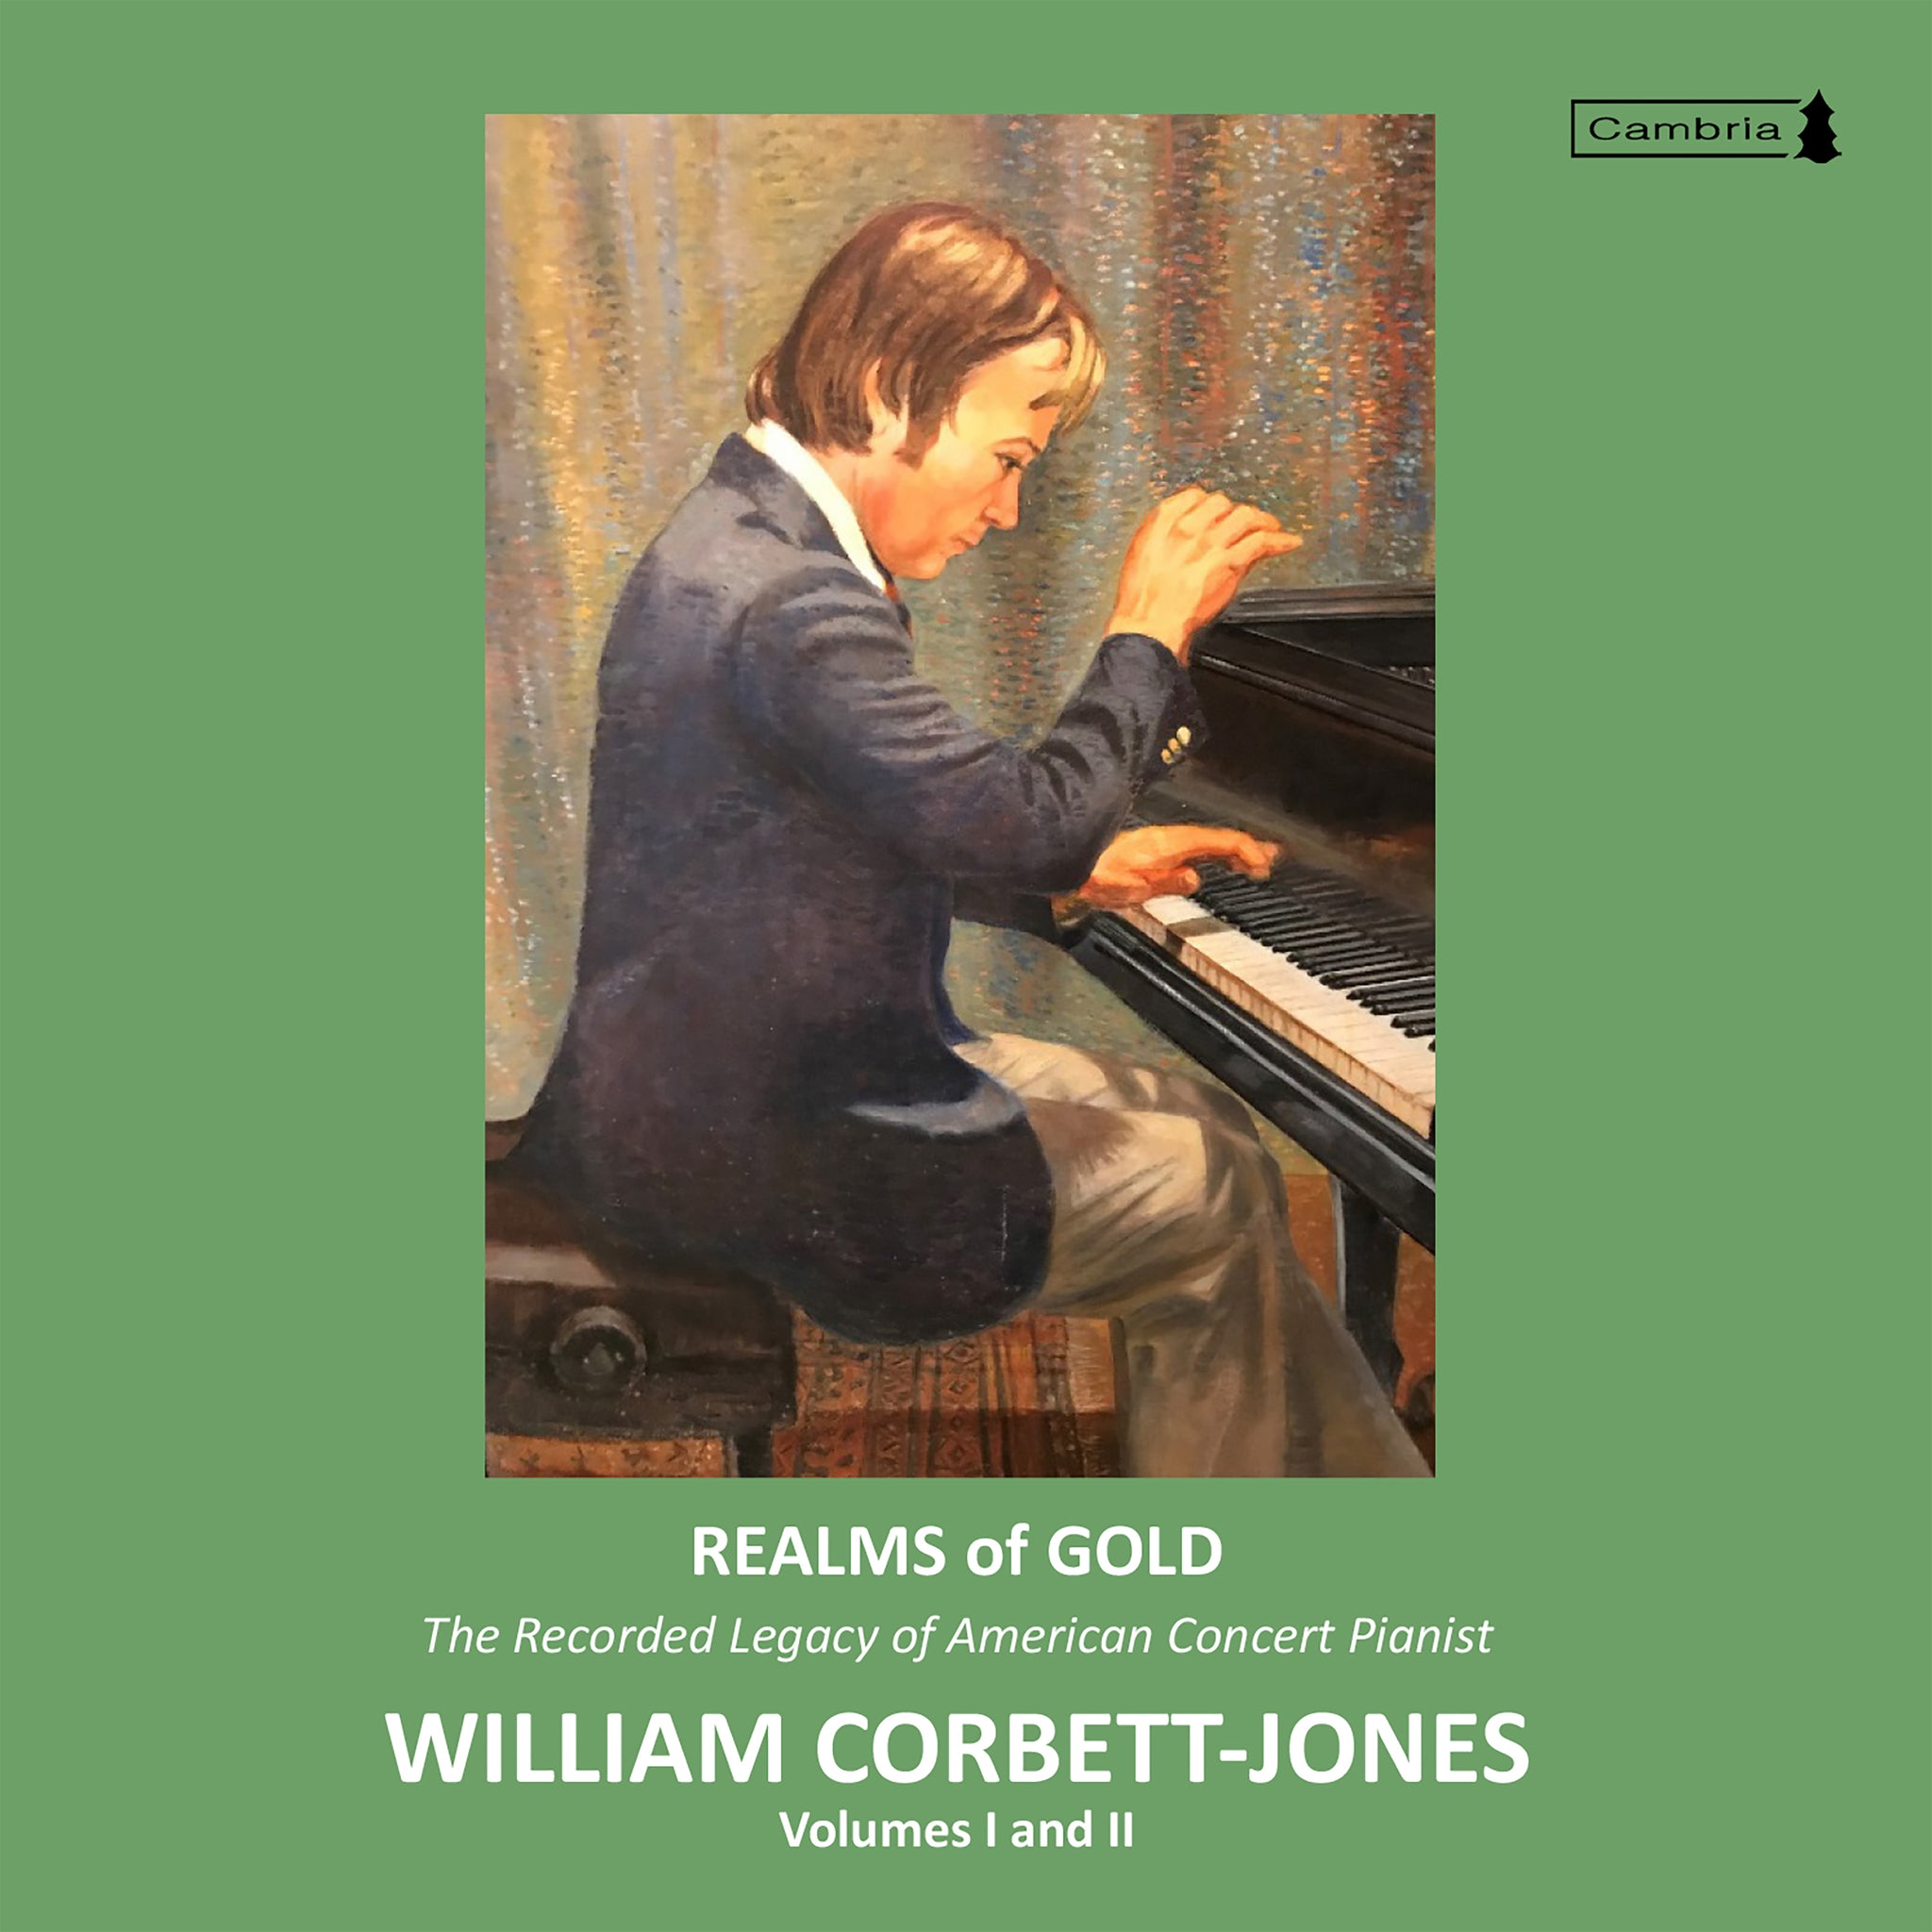 Realms of Gold - The Recorded Legacy of American Concert Pianist William Corbet-Jones